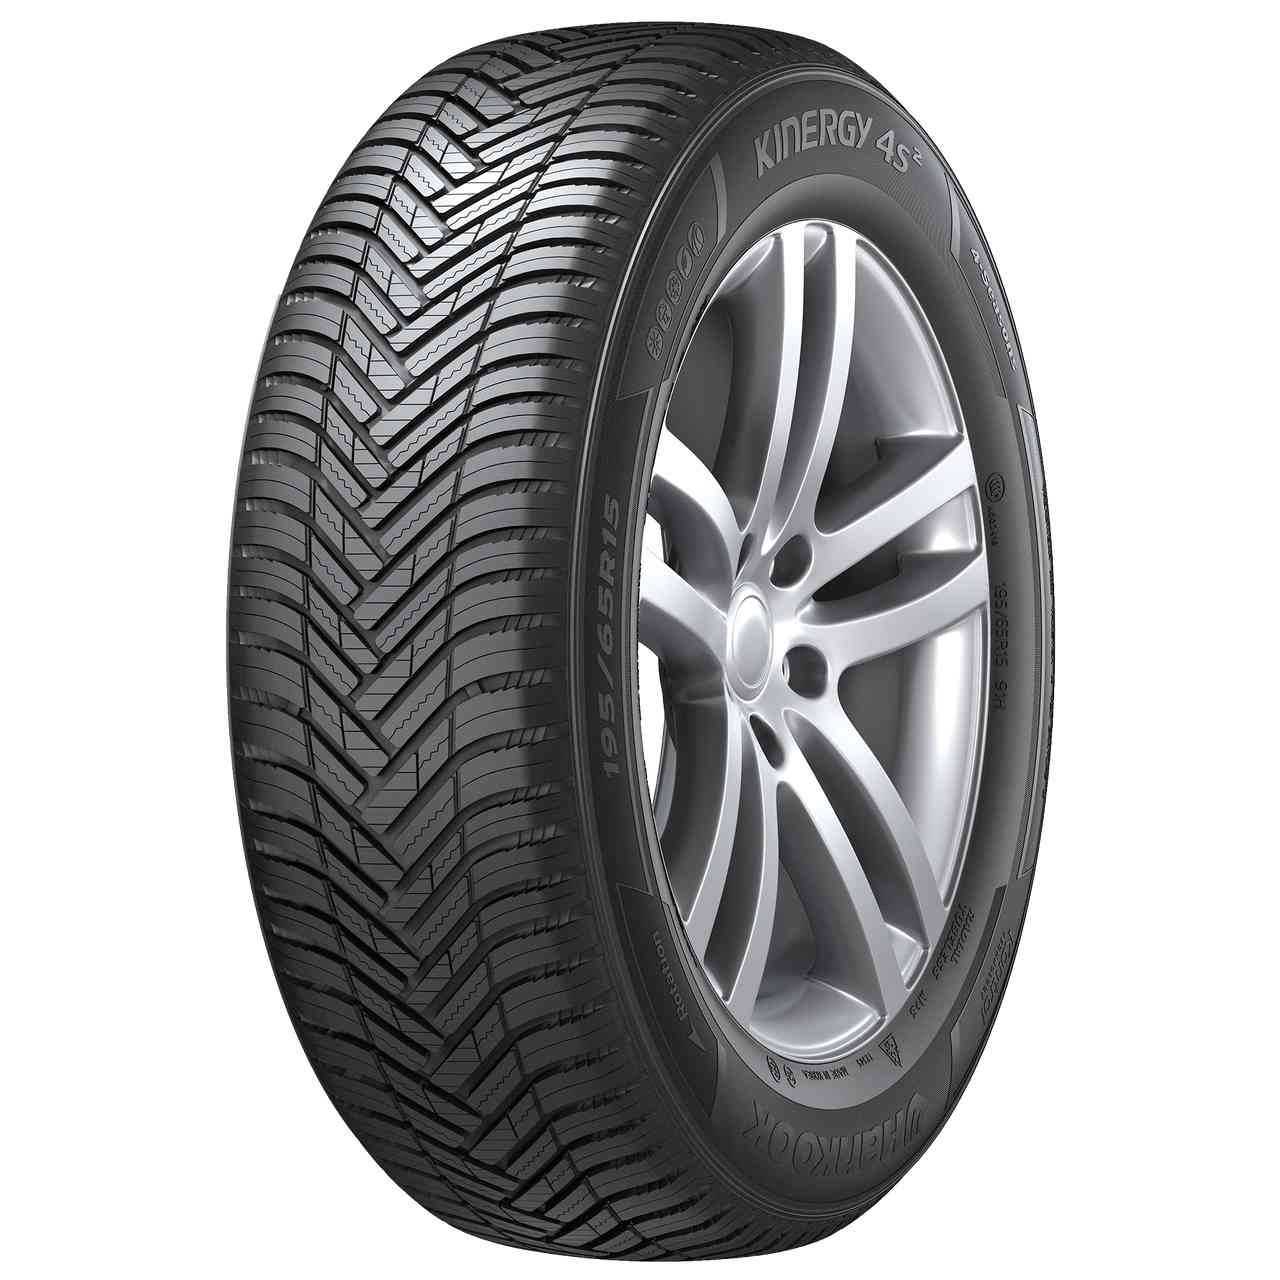 HANKOOK KINERGY 4S 2 (H750) 205/50R17 93W BSW